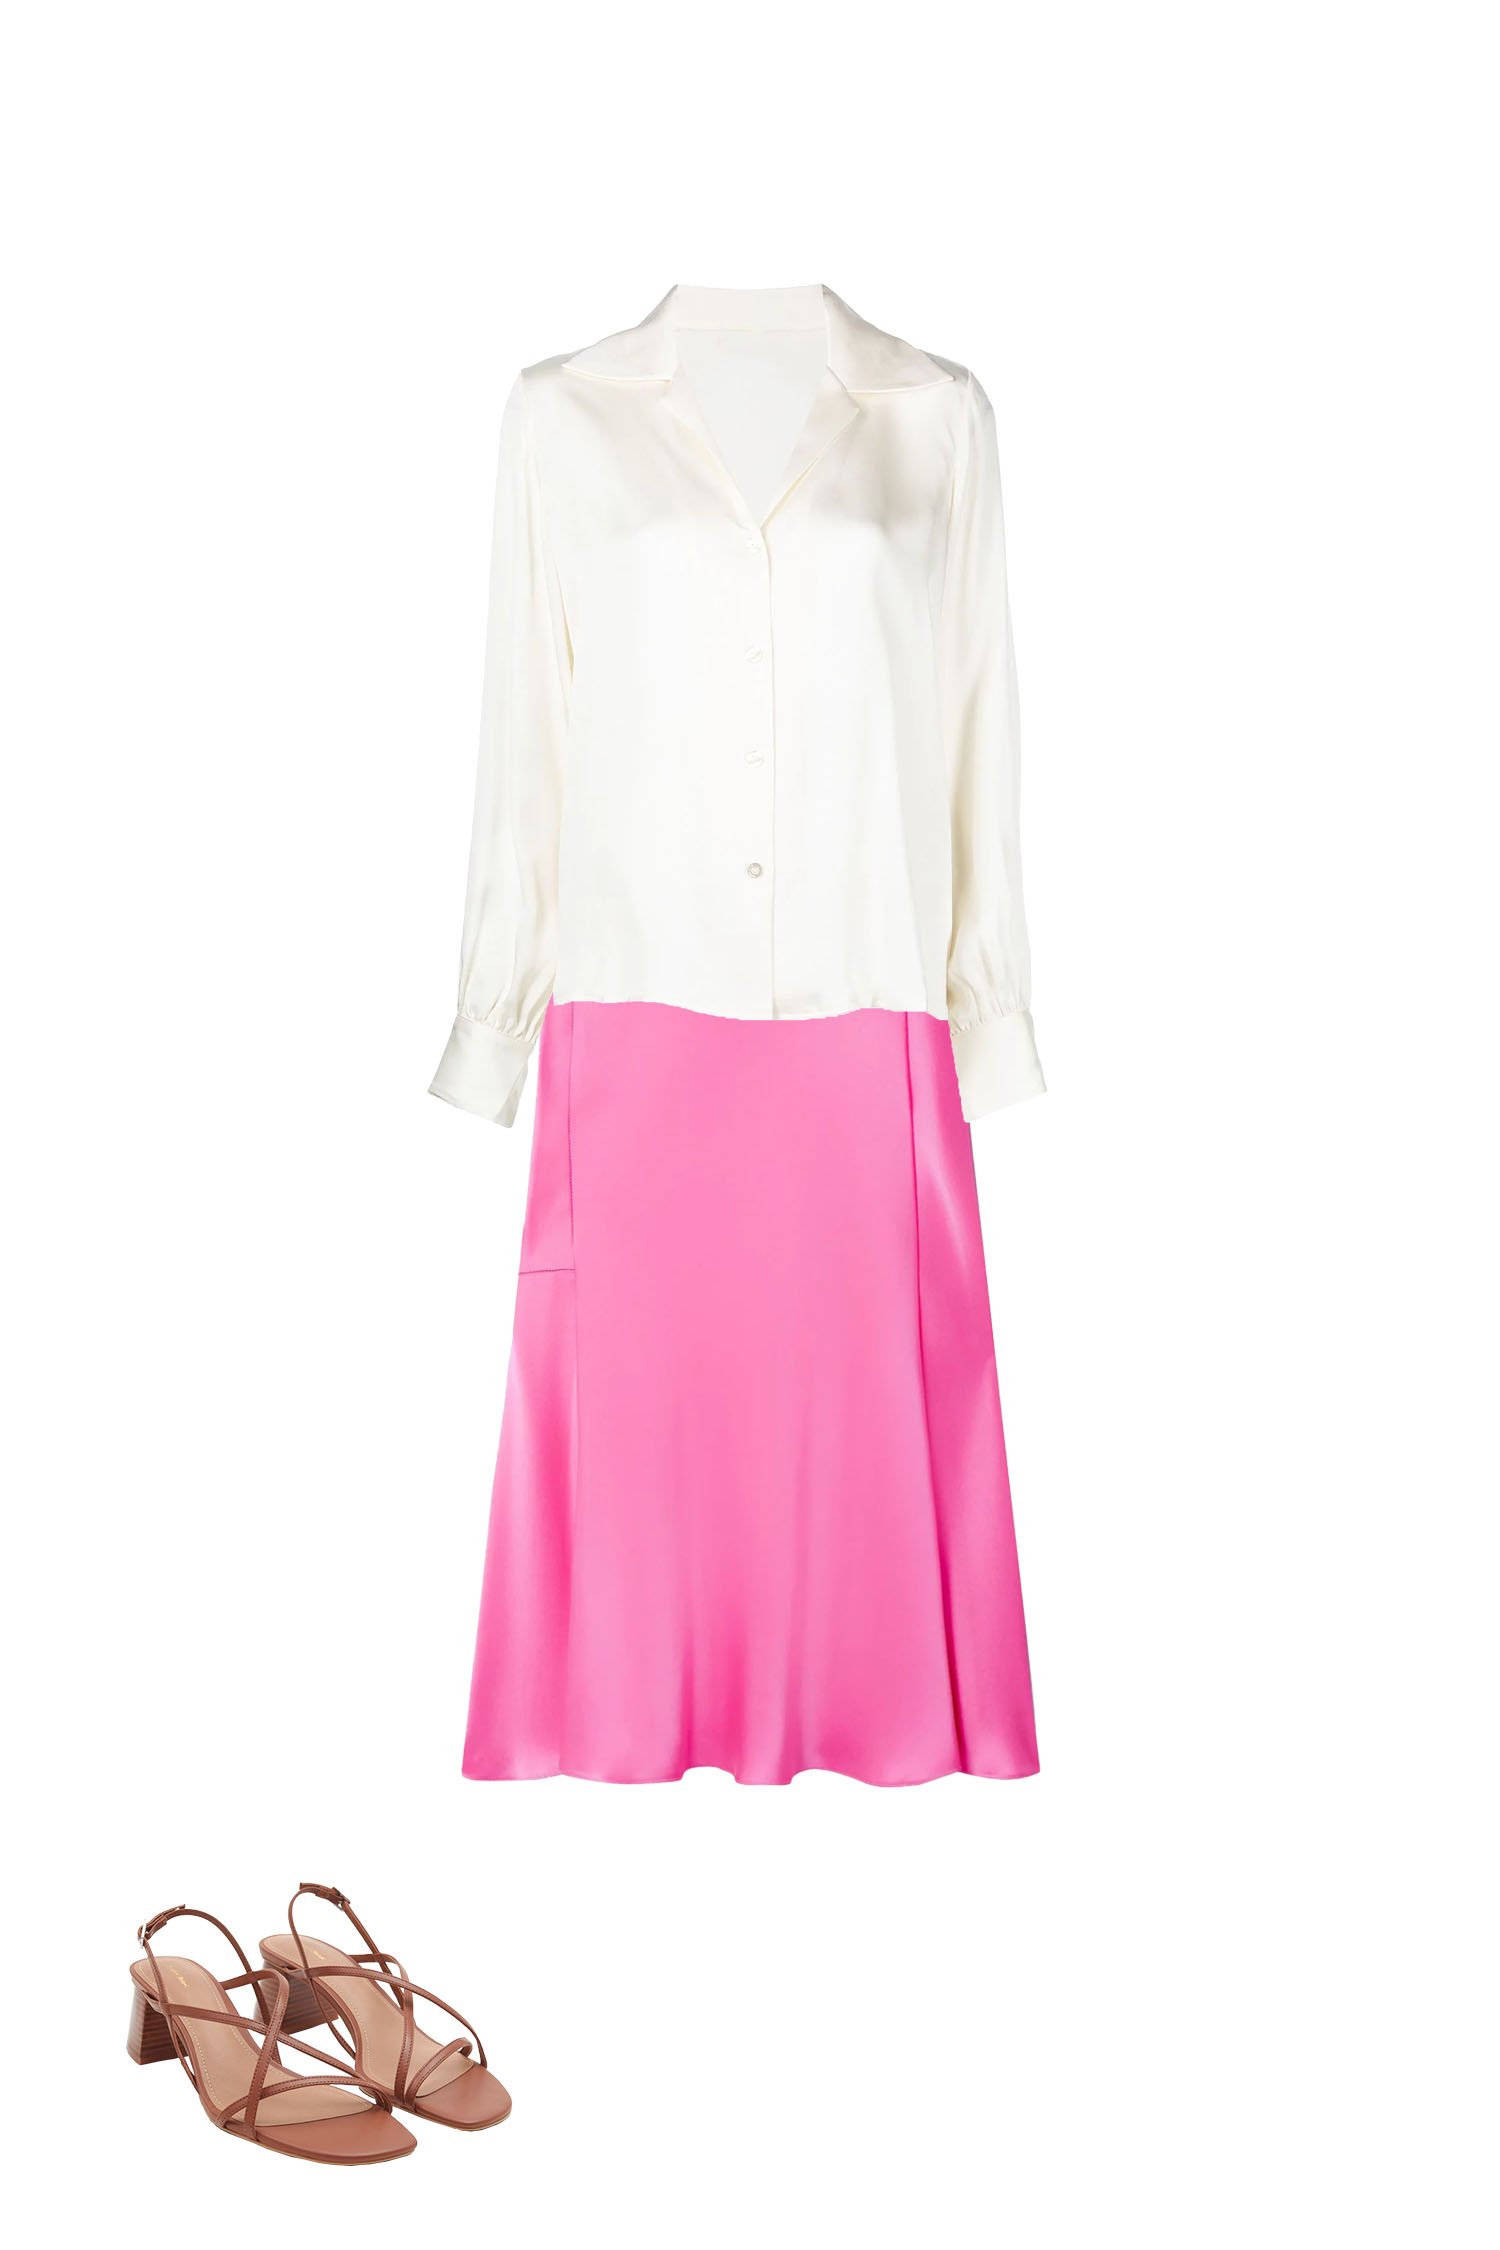 Hot Pink Satin Skirt with Ivory White Silk Shirt Outfit